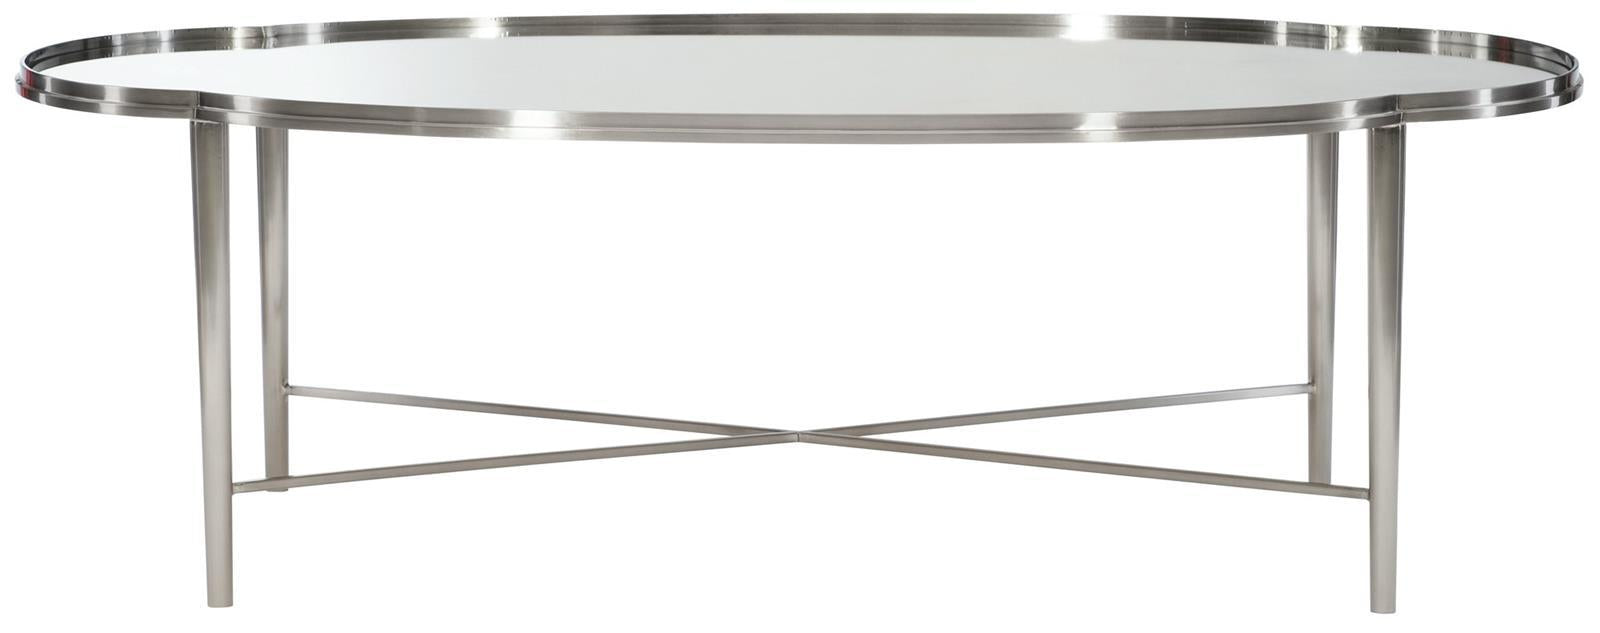 Bernhardt Allure Metal Oval Cocktail Table in White & Silver 399-013 image